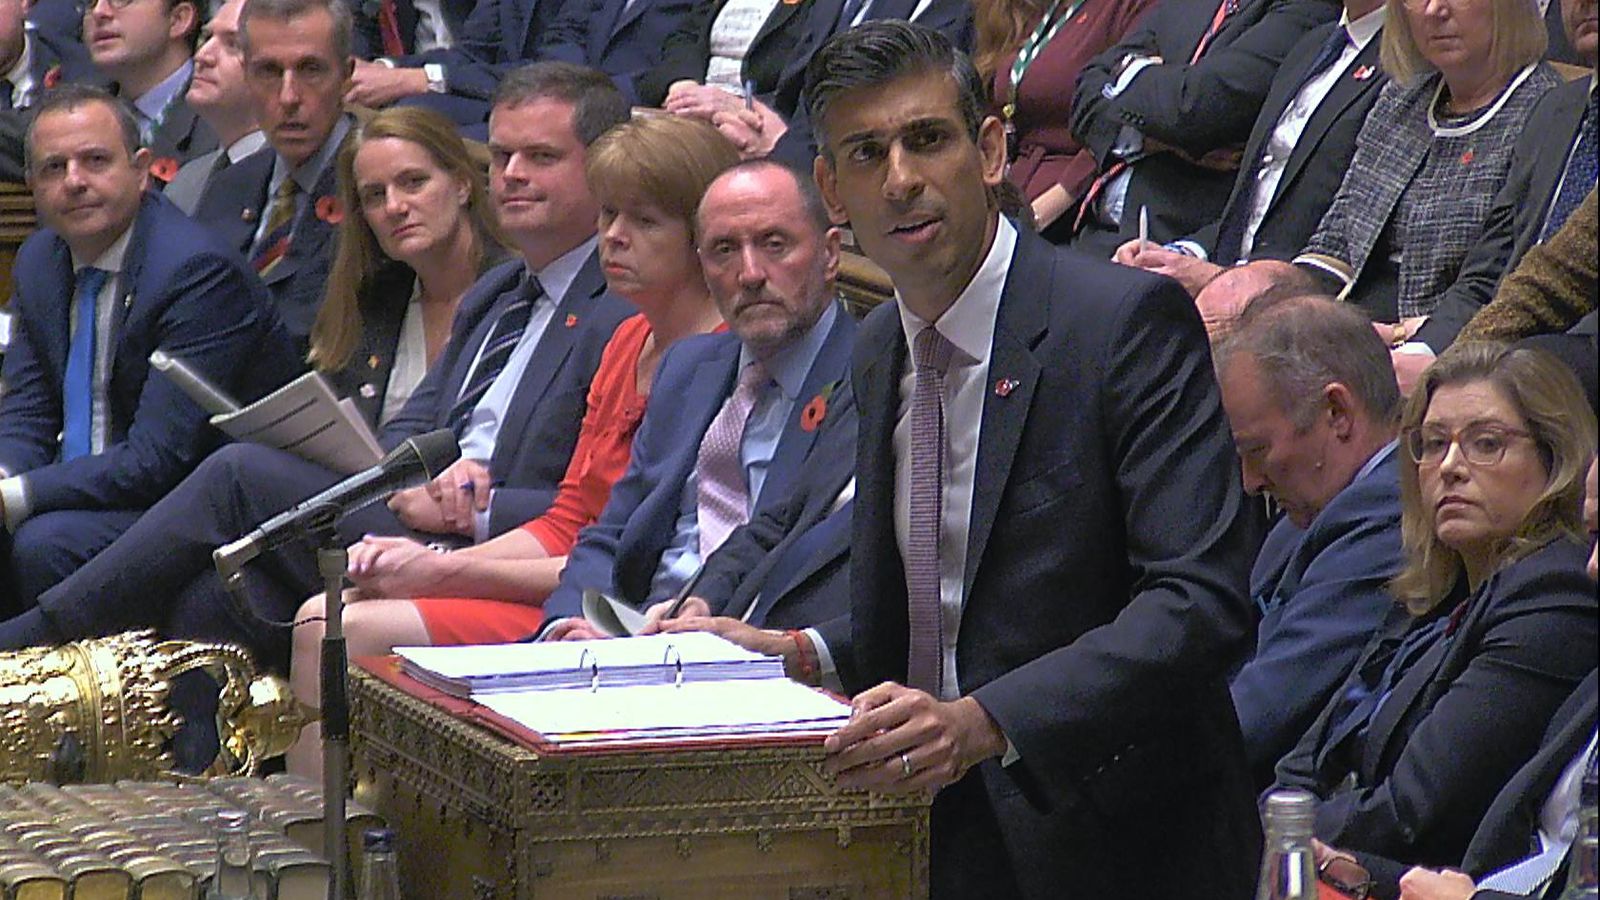 Prime Minister's Questions: Rishi Sunak says it is 'absolutely right' Gavin Williamson resigned - and admits 'regret' over appointment